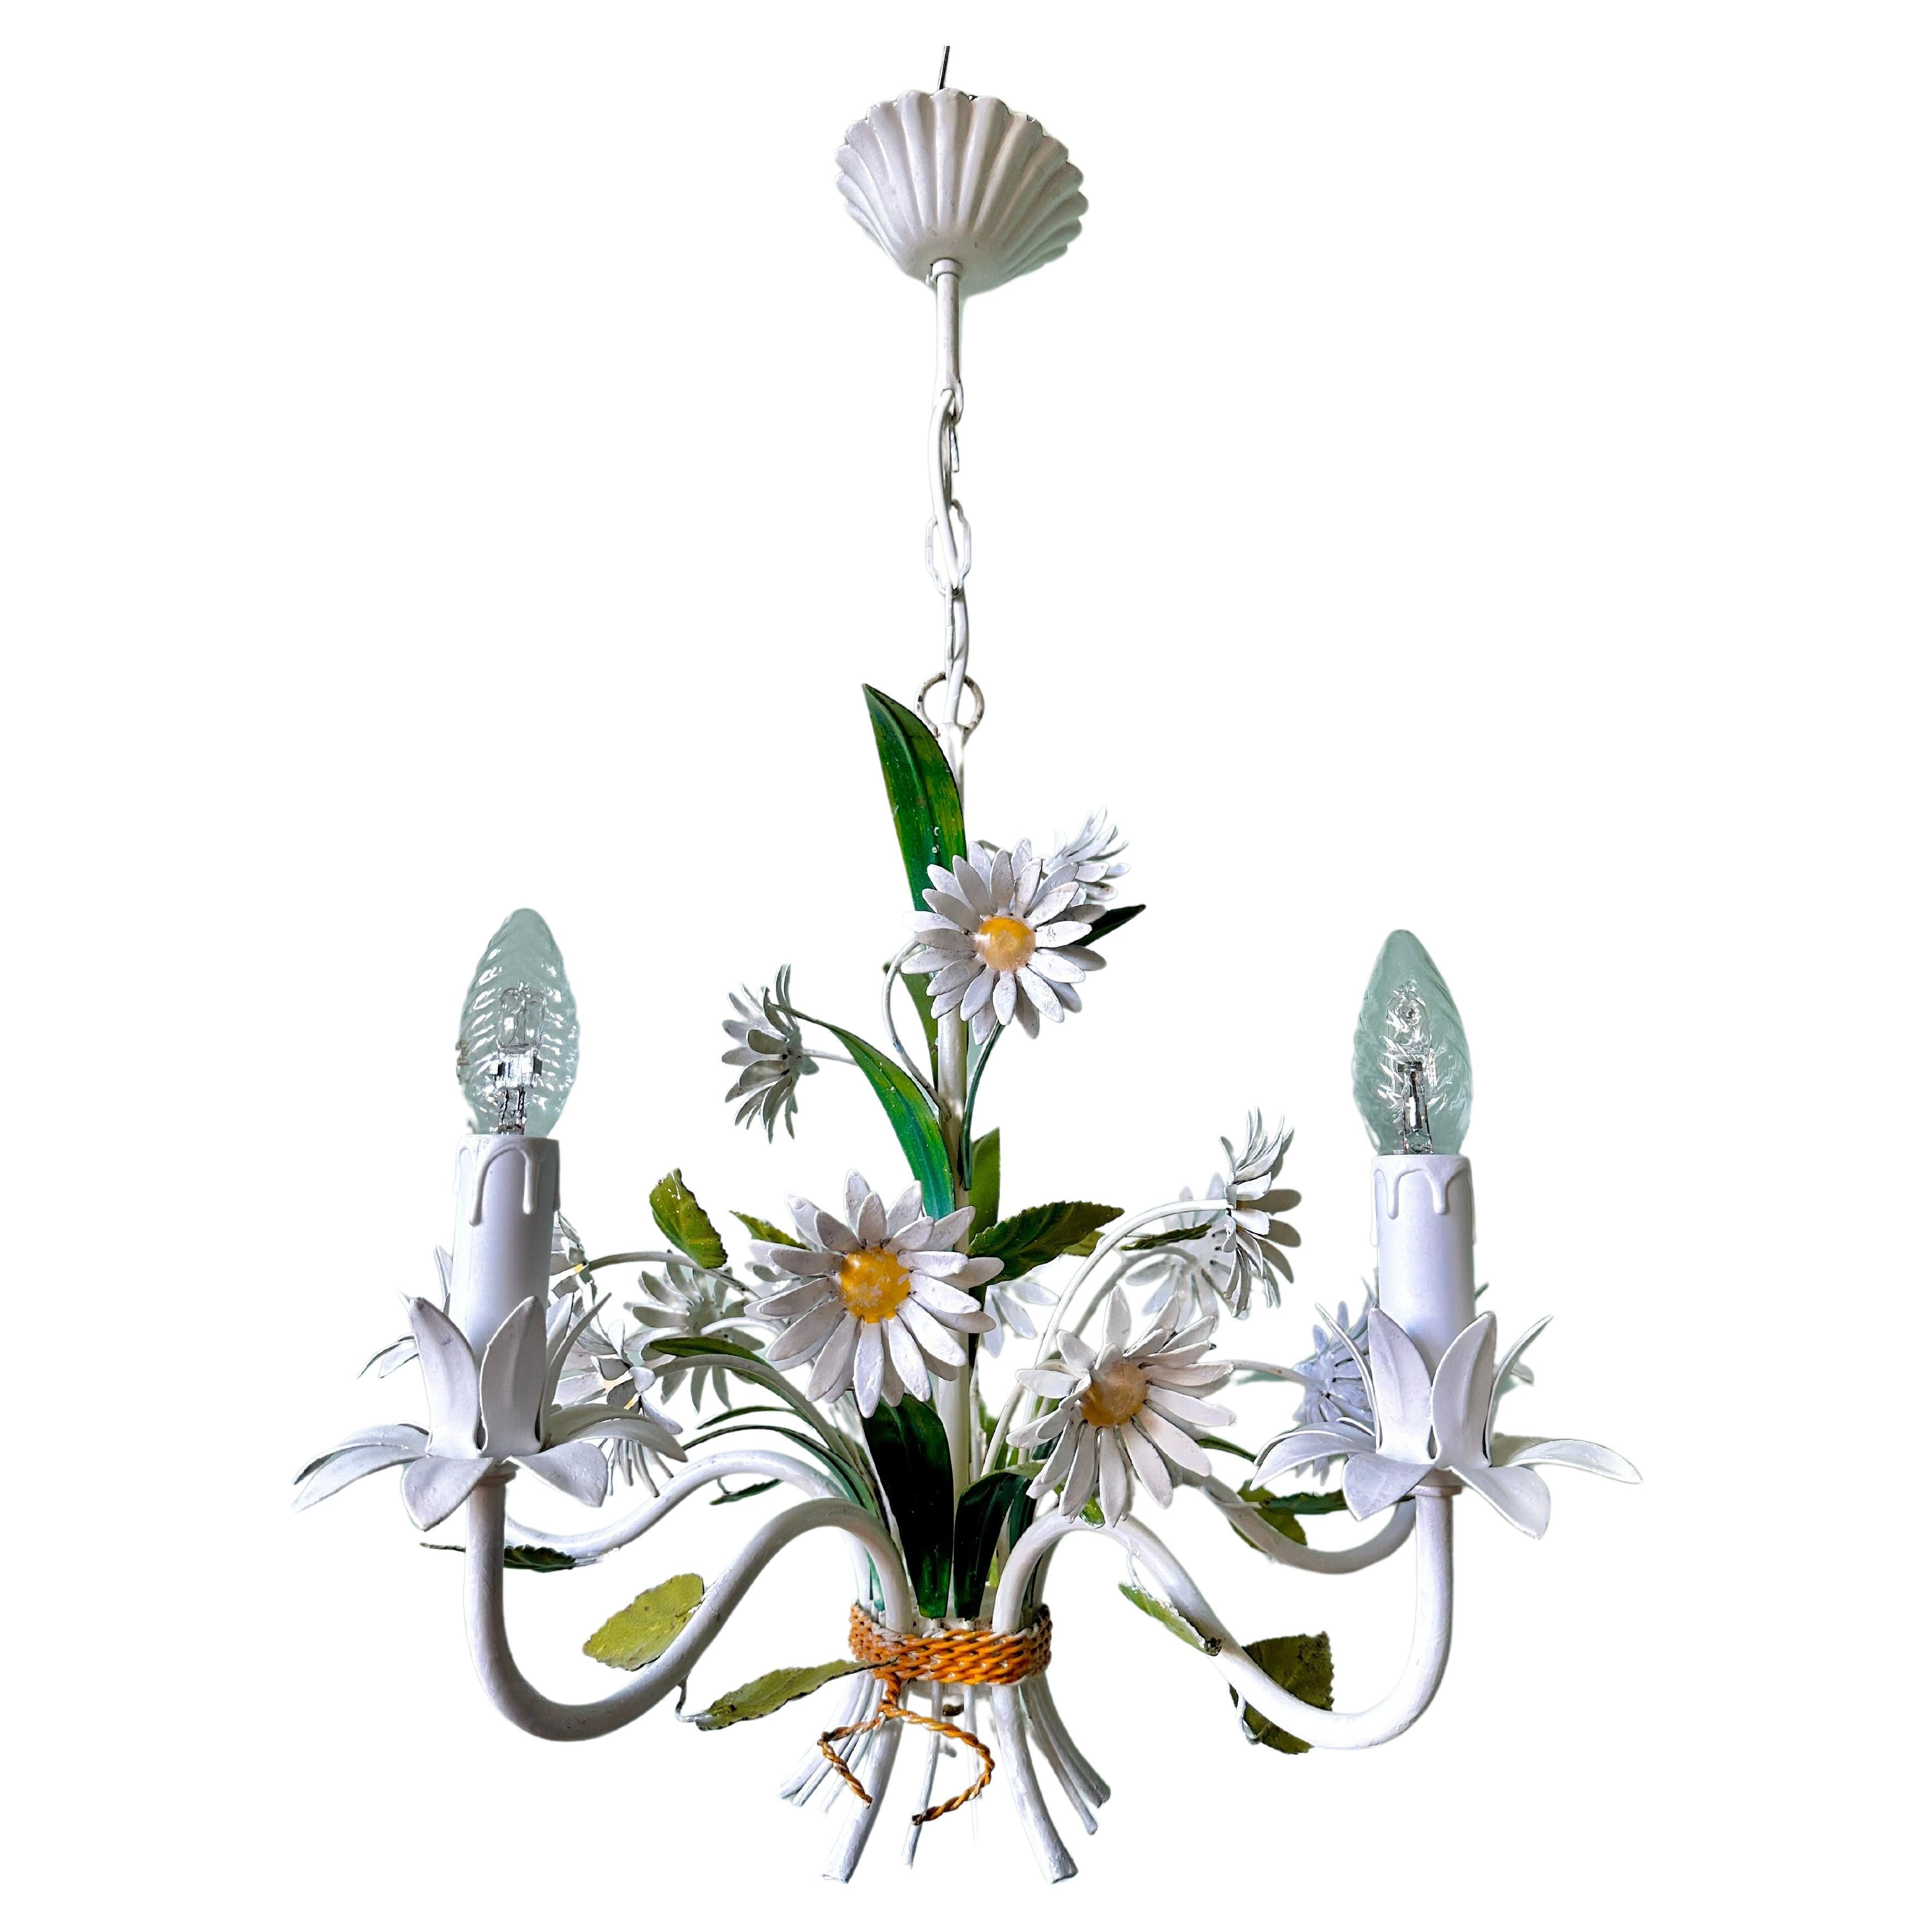 1960s French Tole Toleware Daisy Chandelier For Sale